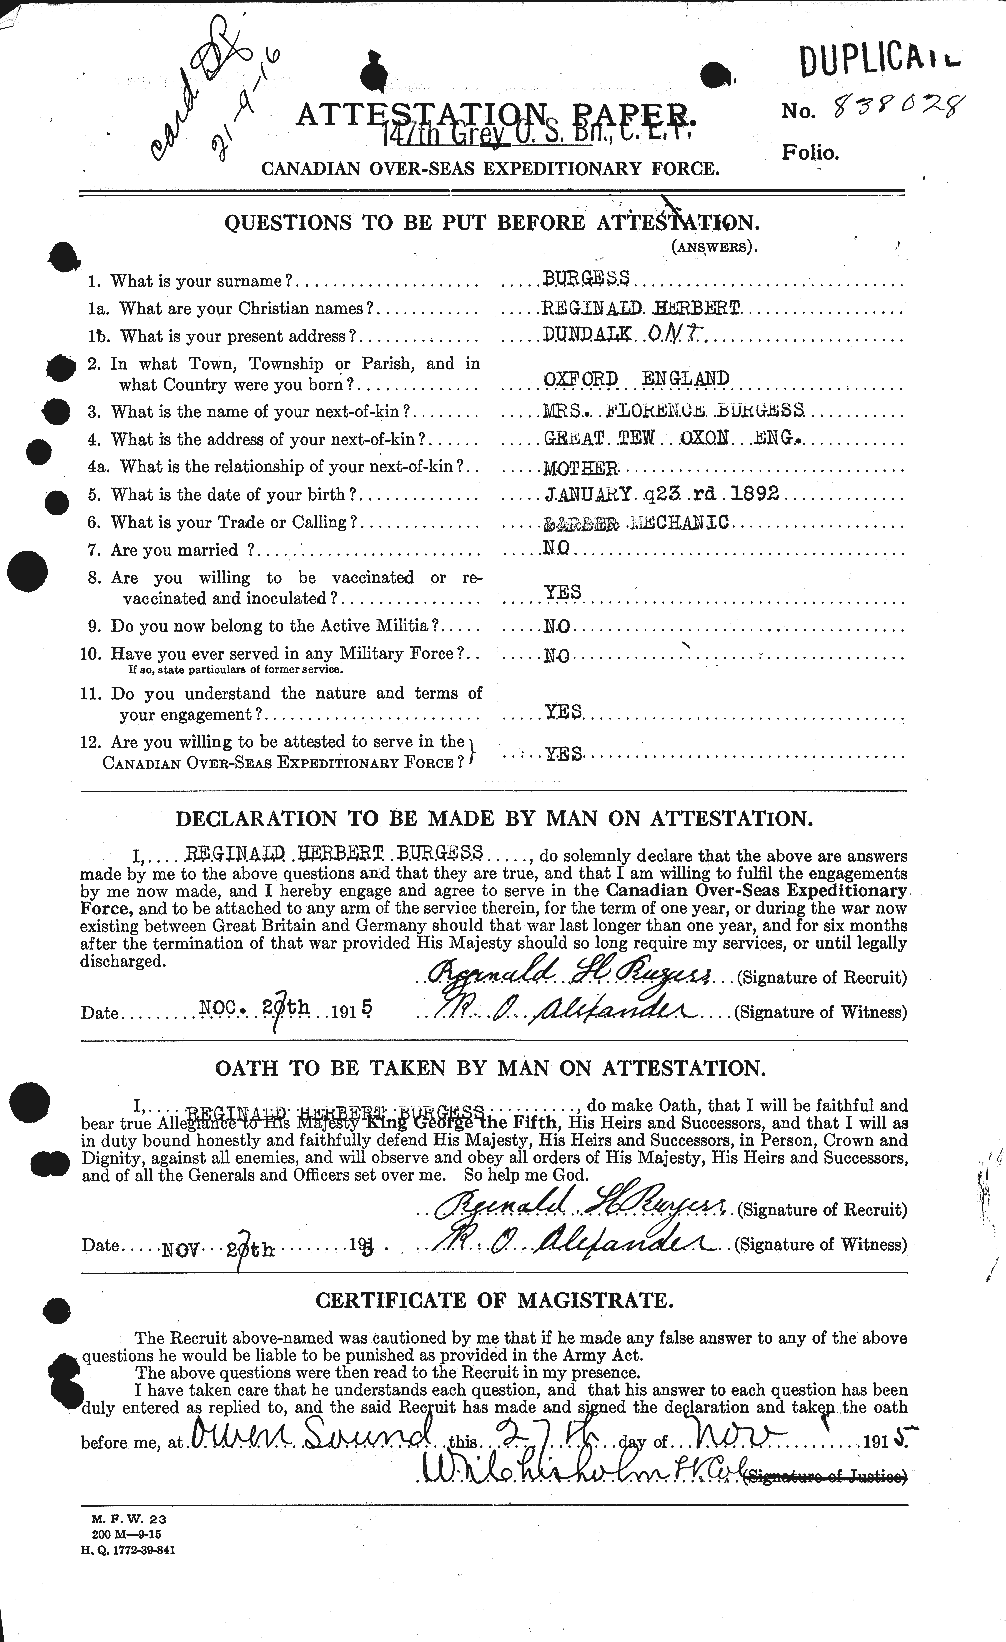 Personnel Records of the First World War - CEF 272187a